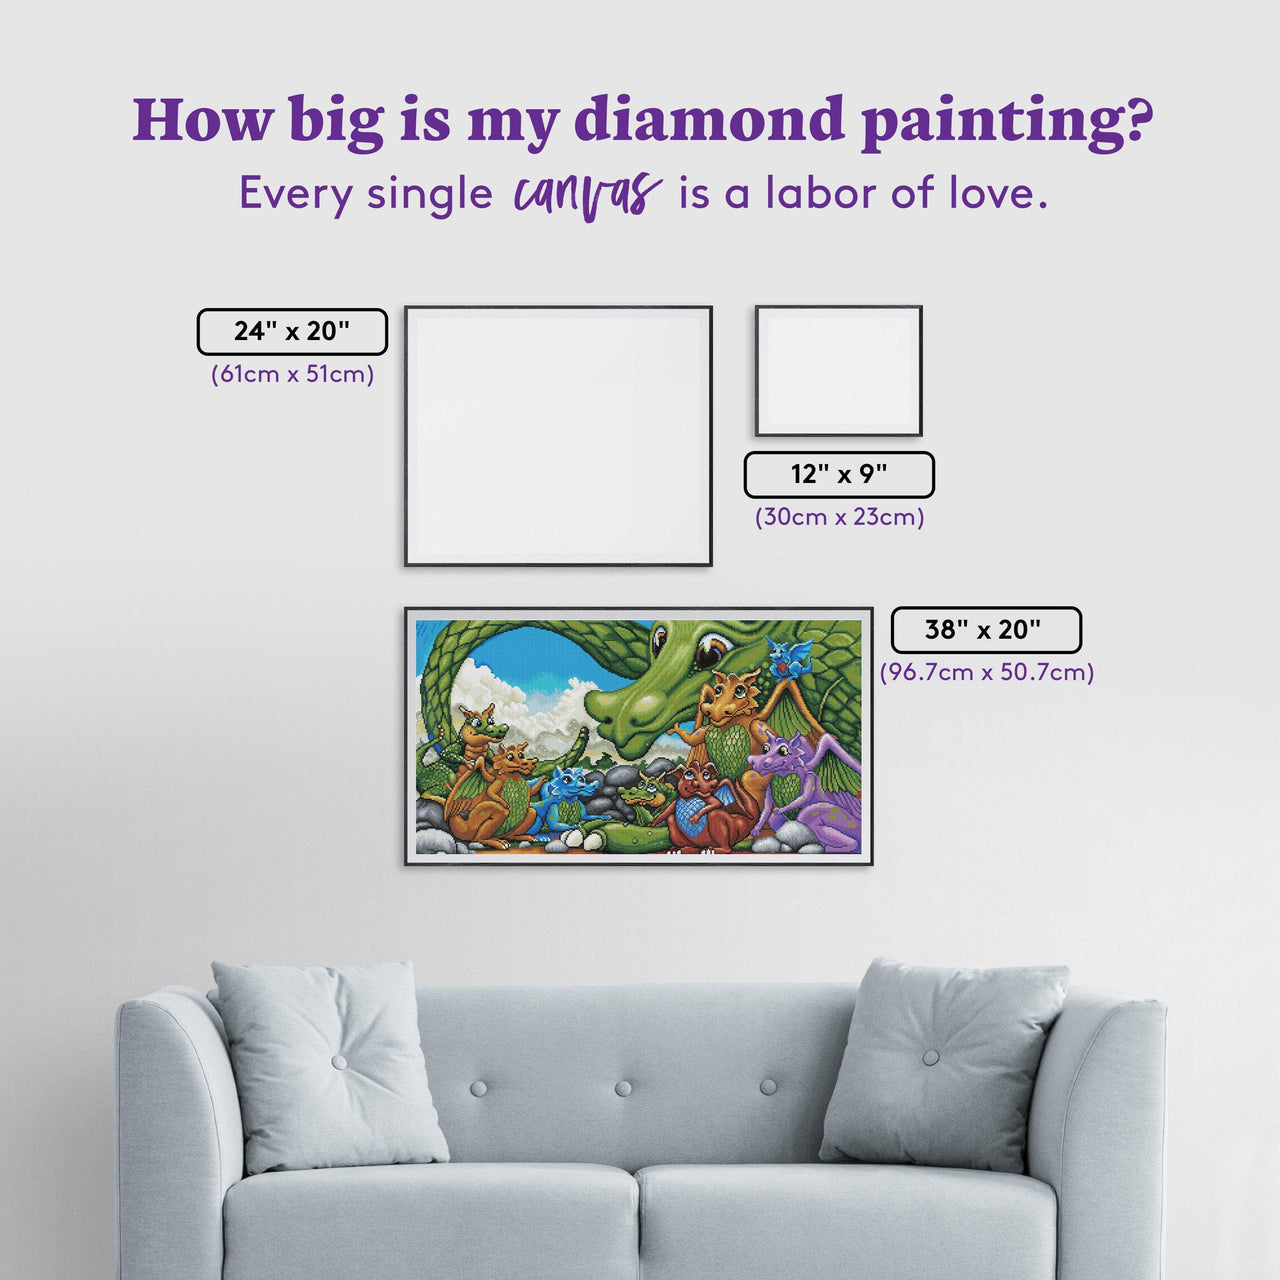 Diamond Painting A Gathering of Dragons & Draglings 20" x 38" (50.7cm x 96.7cm) / Round with 59 Colors including 4 ABs / 62,445